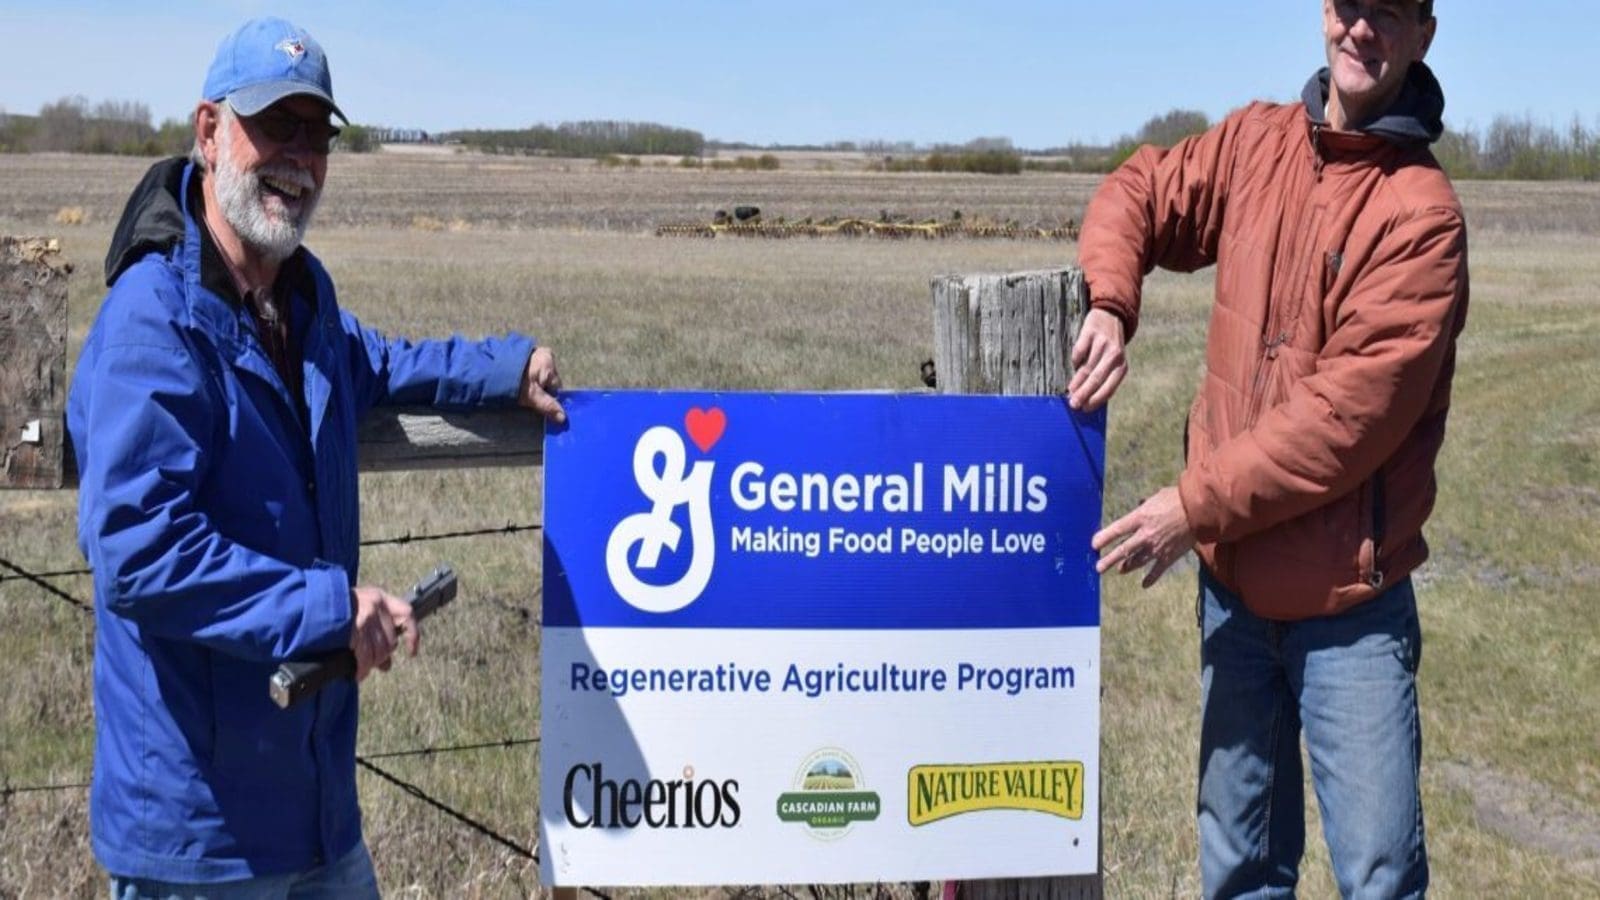 General Mills on track to meet 2030 regenerative agriculture goal